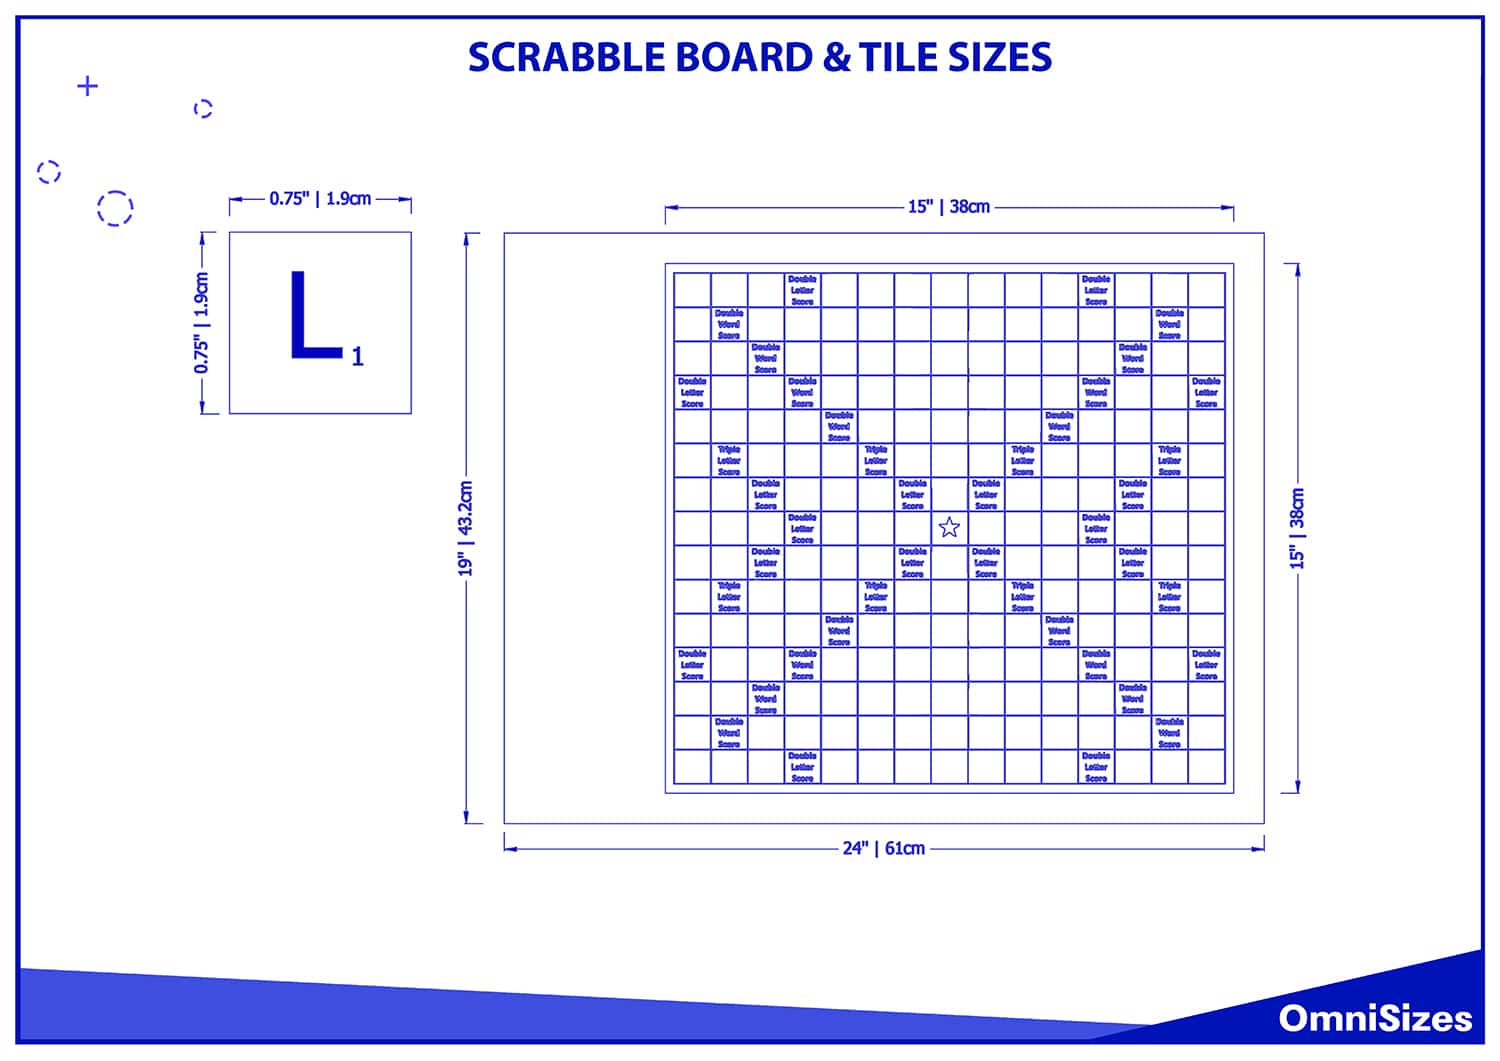 Scrabble board and tile sizes